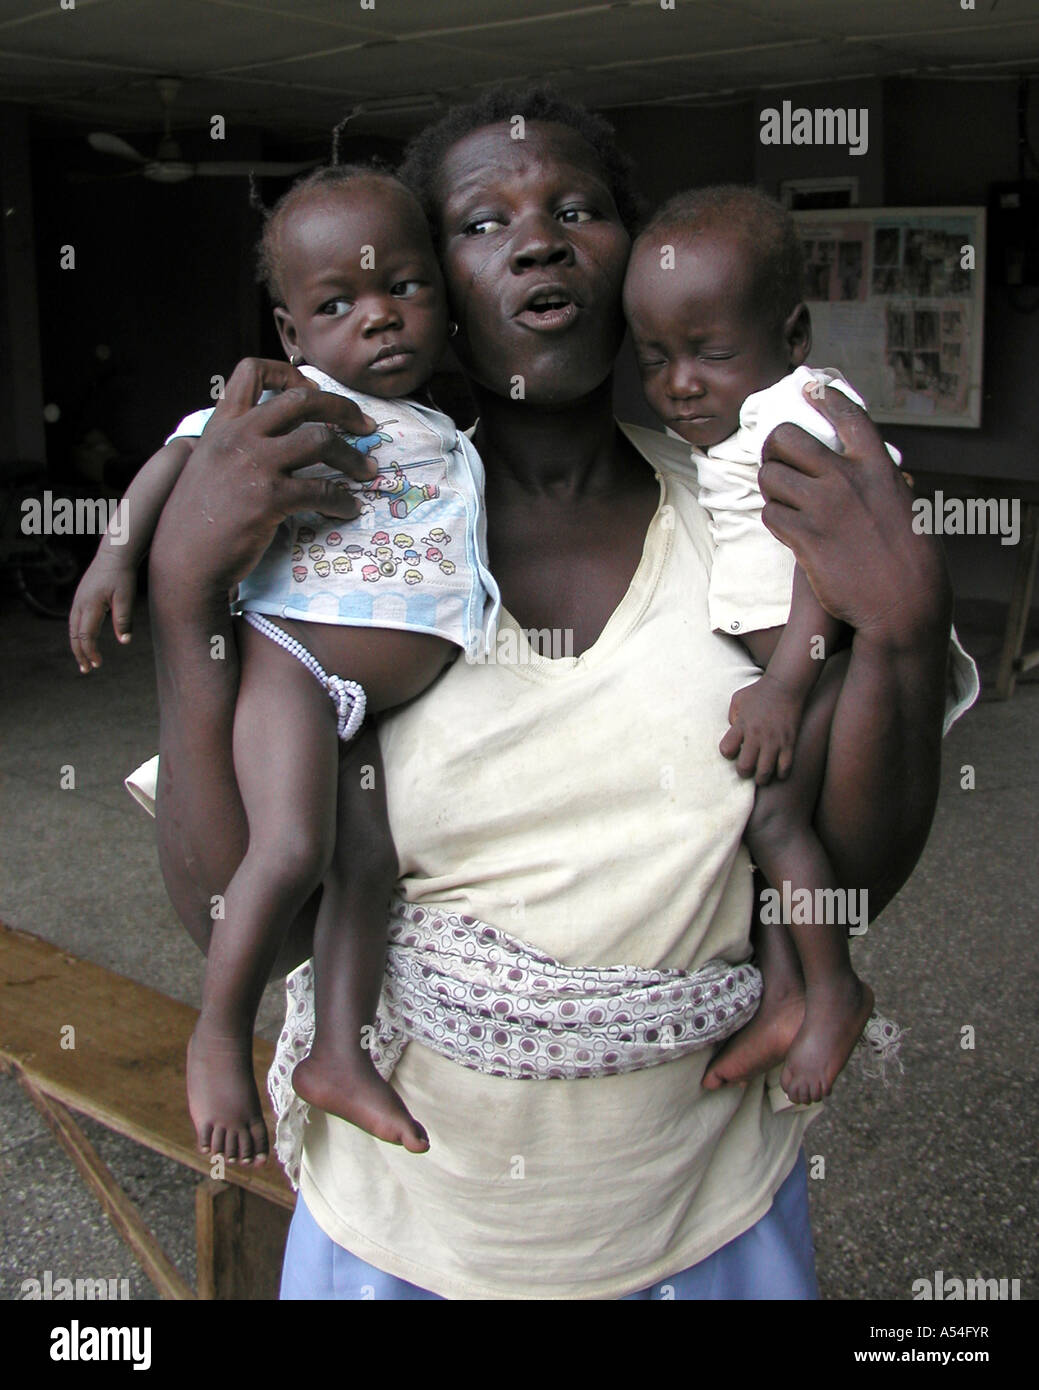 Painet hn2245 7827 ghana woman twins bolgatanga country developing nation less economically developed culture emerging Stock Photo